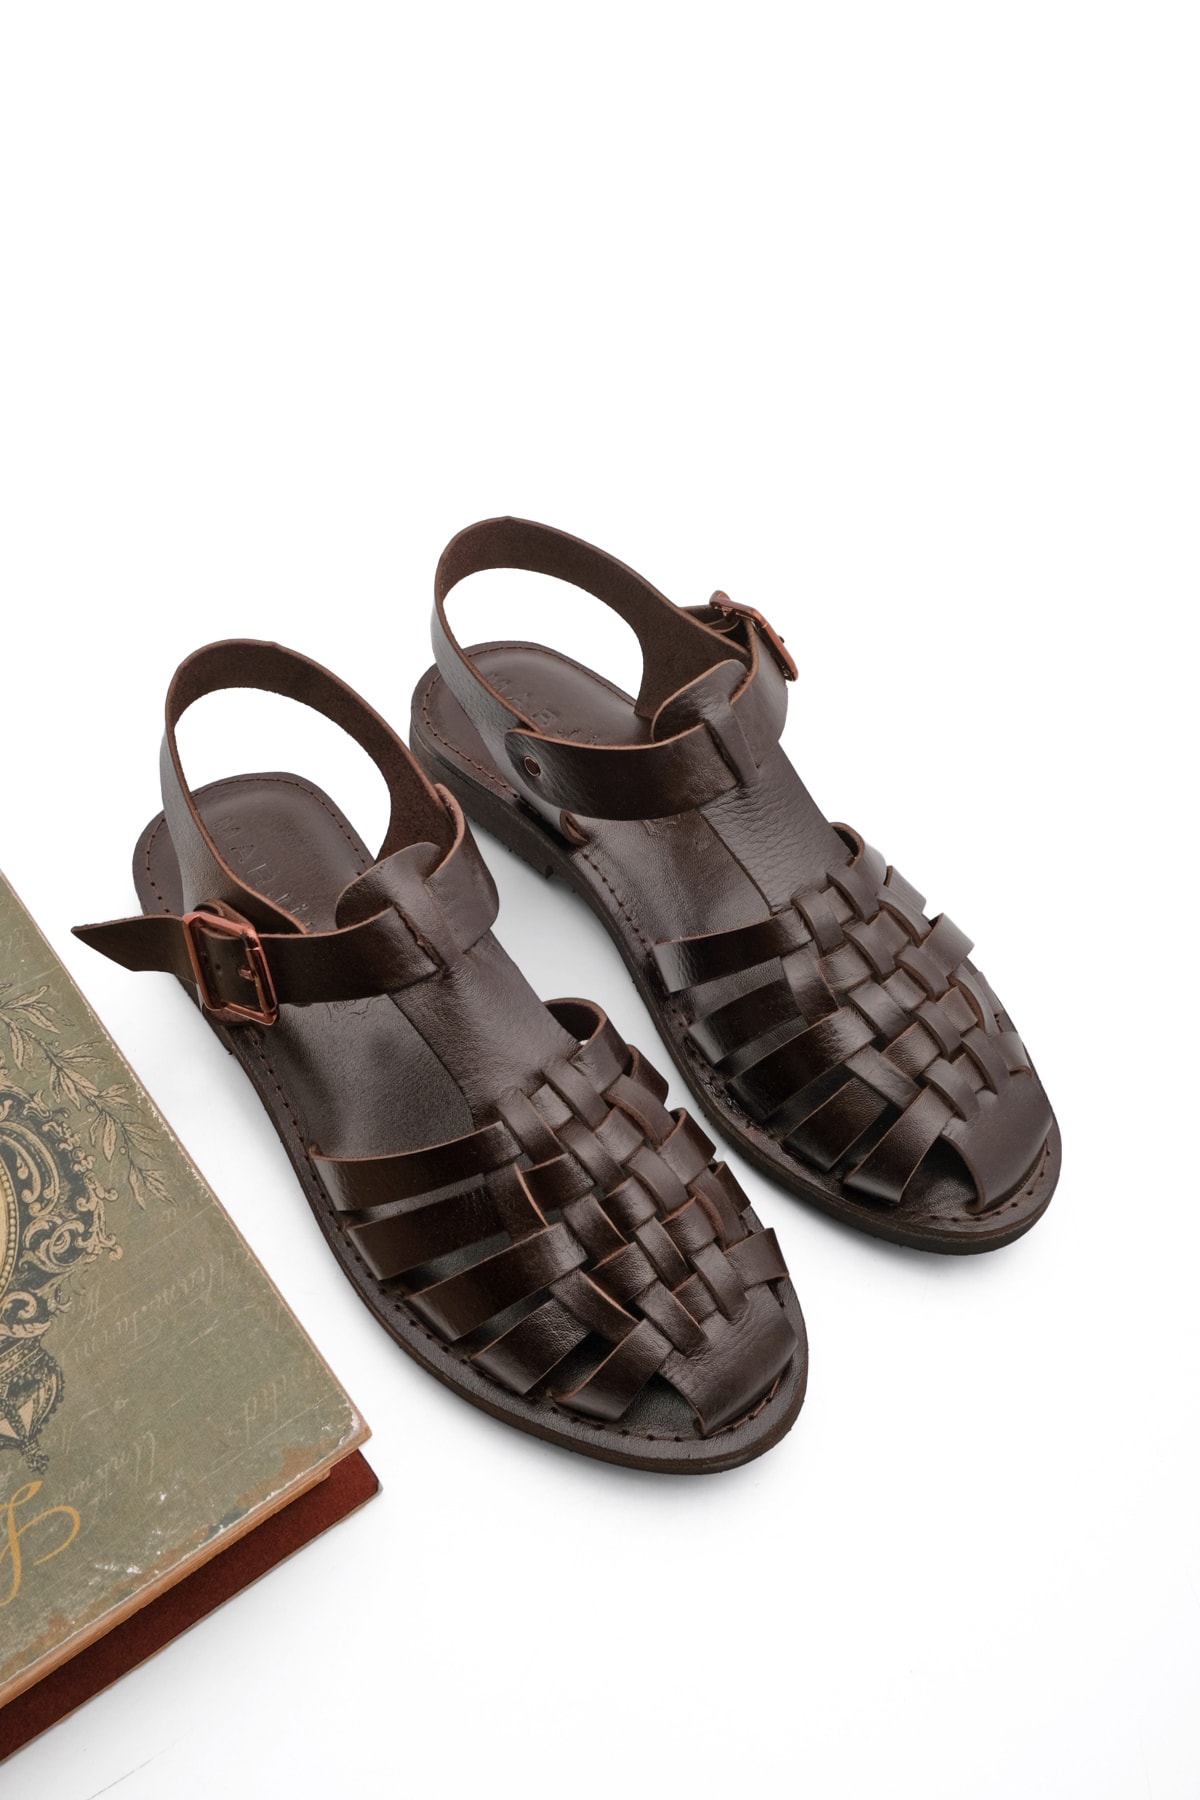 Marjin Women's Daily Sandals Made Of Genuine Leather With Lightweight Eva Sole, Kesva Brown.